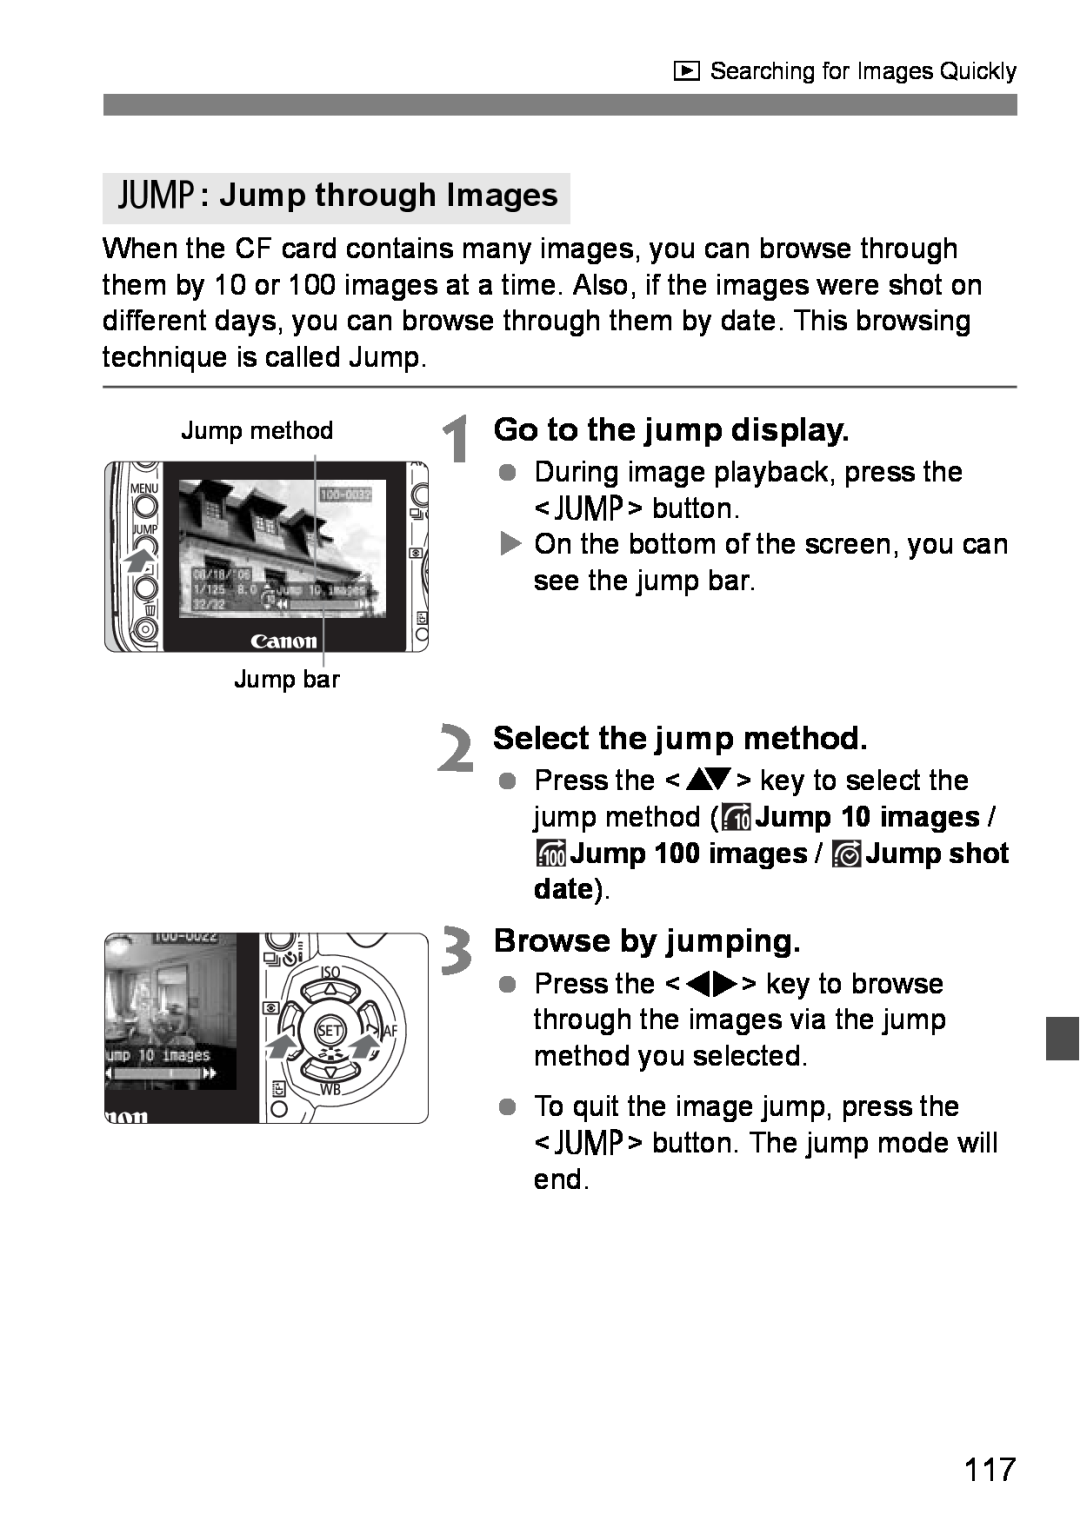 Canon EOS DIGITAL REBEL XTI C Jump through Images, Go to the jump display, Select the jump method, Browse by jumping 